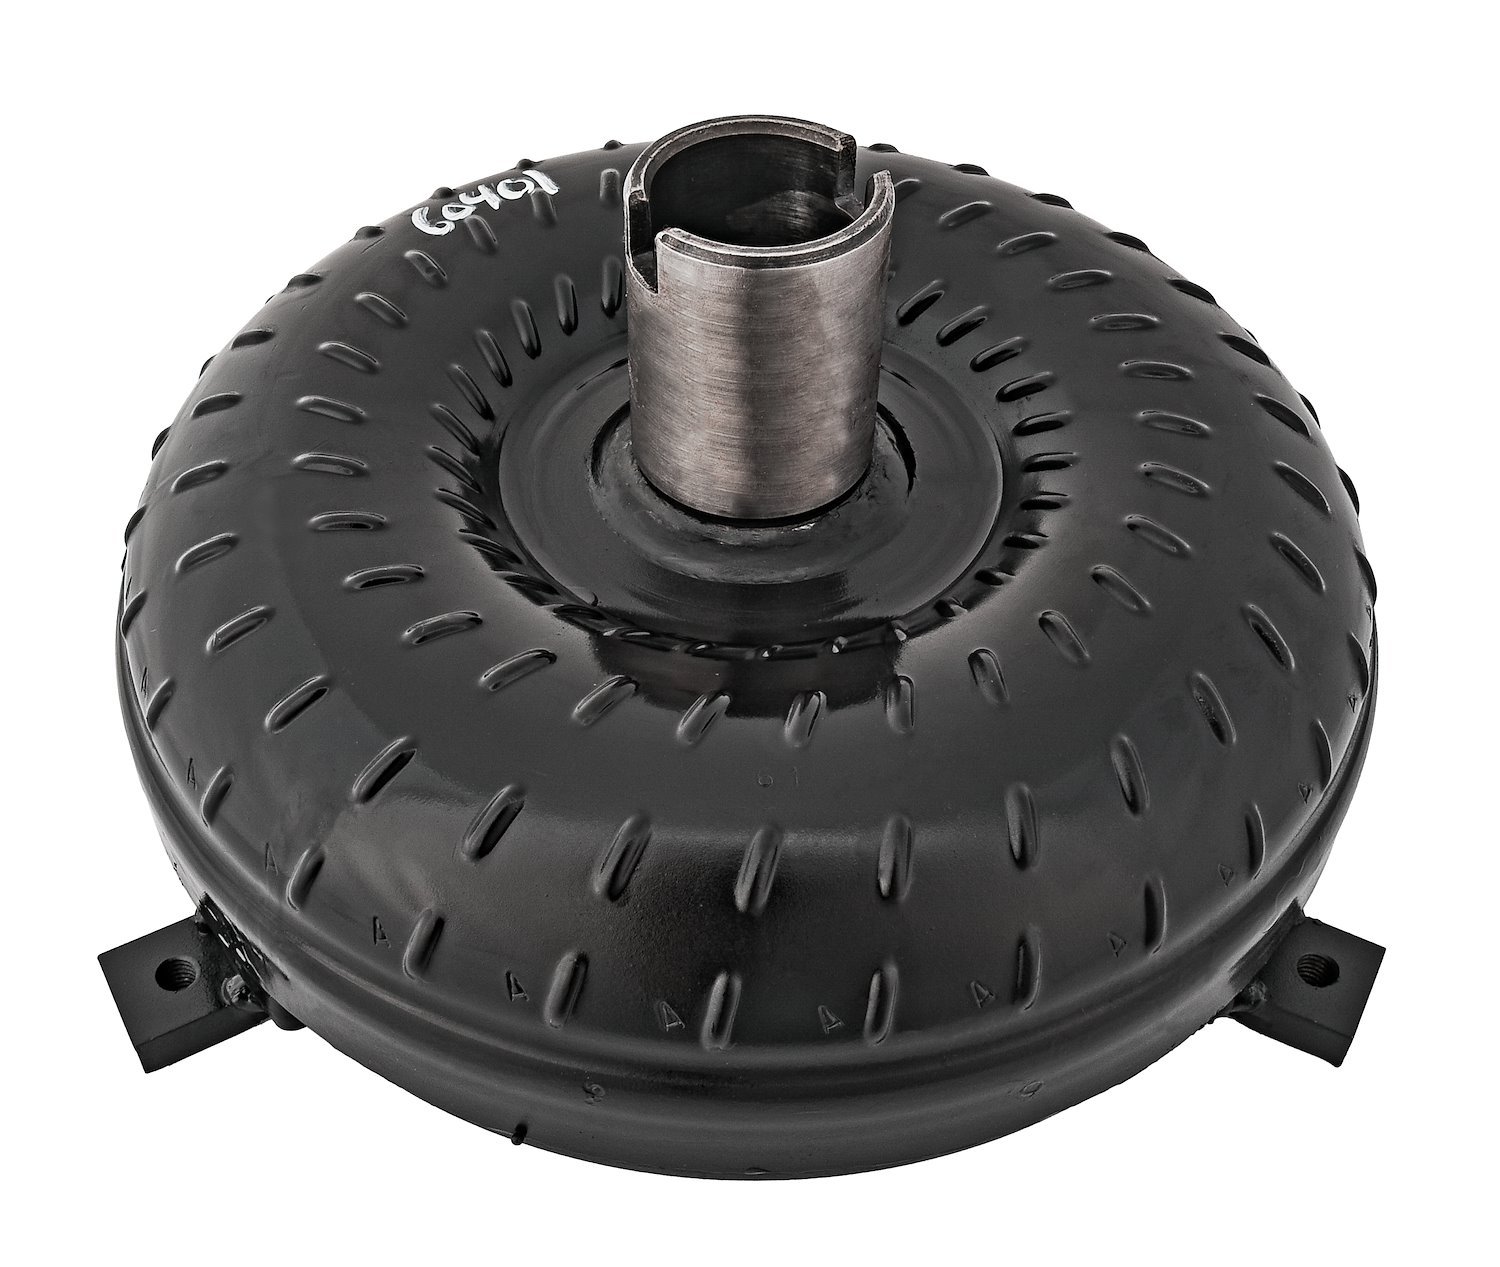 TCI 241500A Torque Converter for GM TH350/TH400 